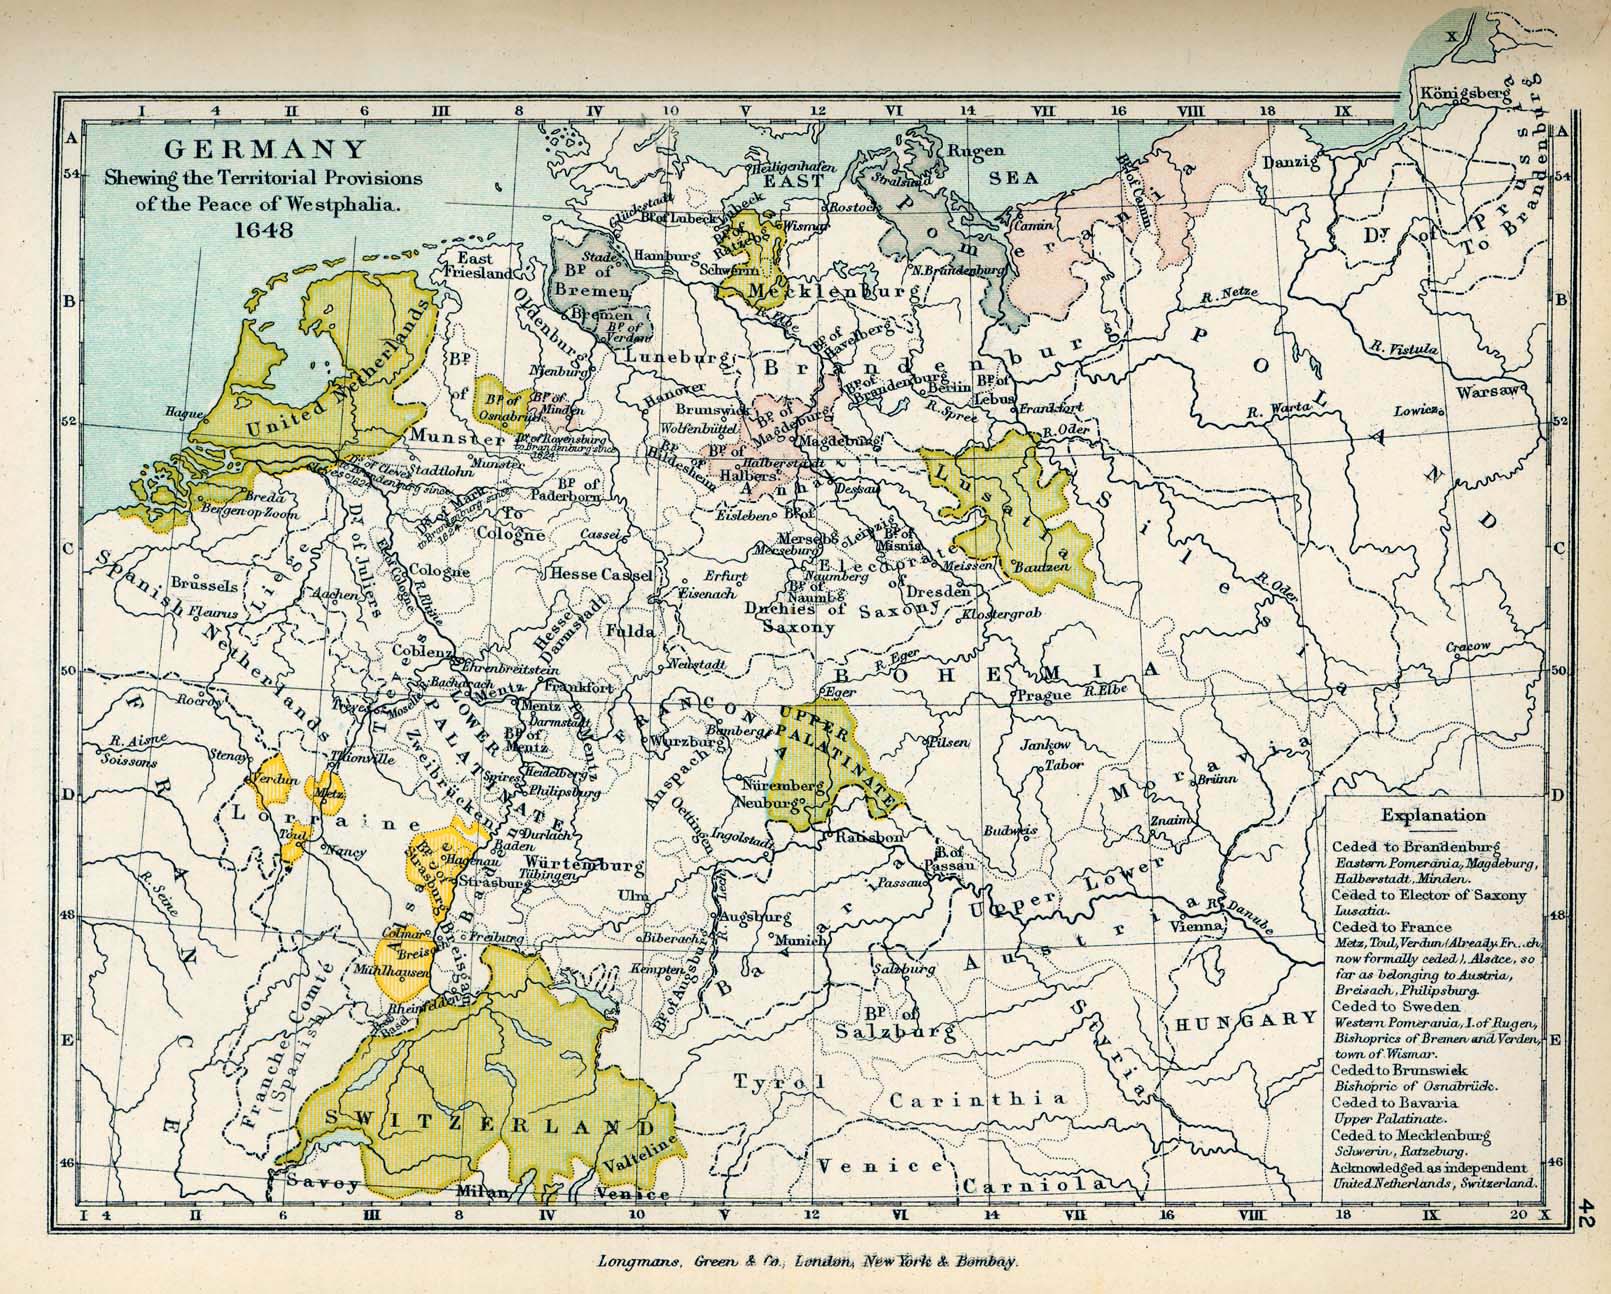 Map of Germany 1648 - Territorial Provisions of the Peace of Westphalia